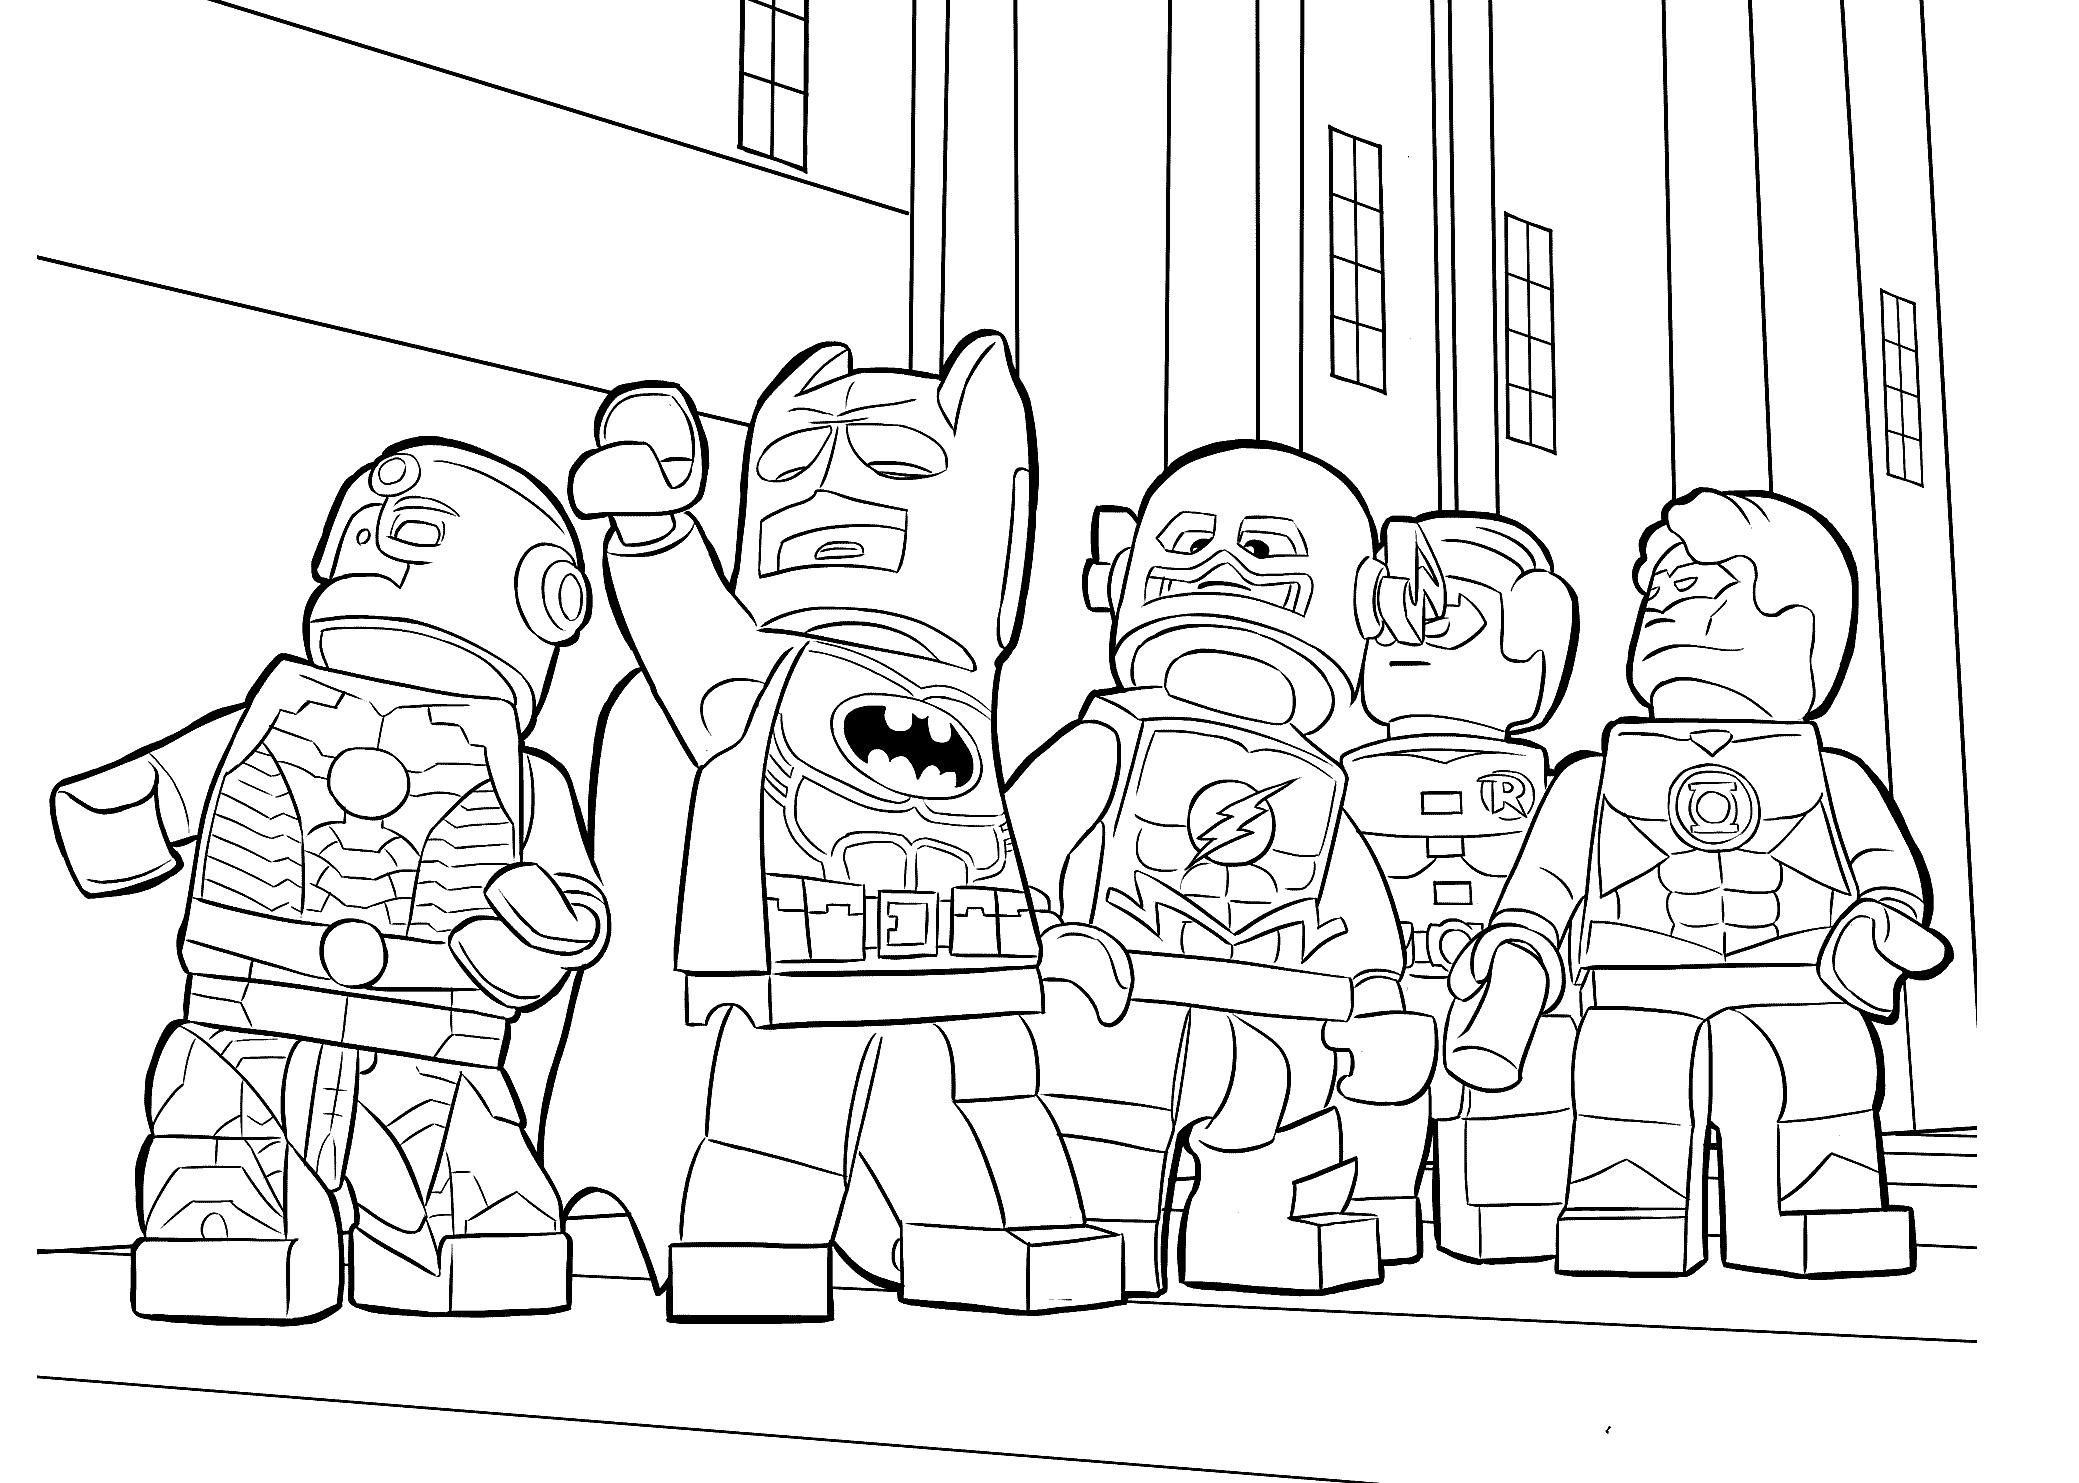 Coloring Pages For Boys Lego
 Lego heroes coloring page for boys printable free Lego